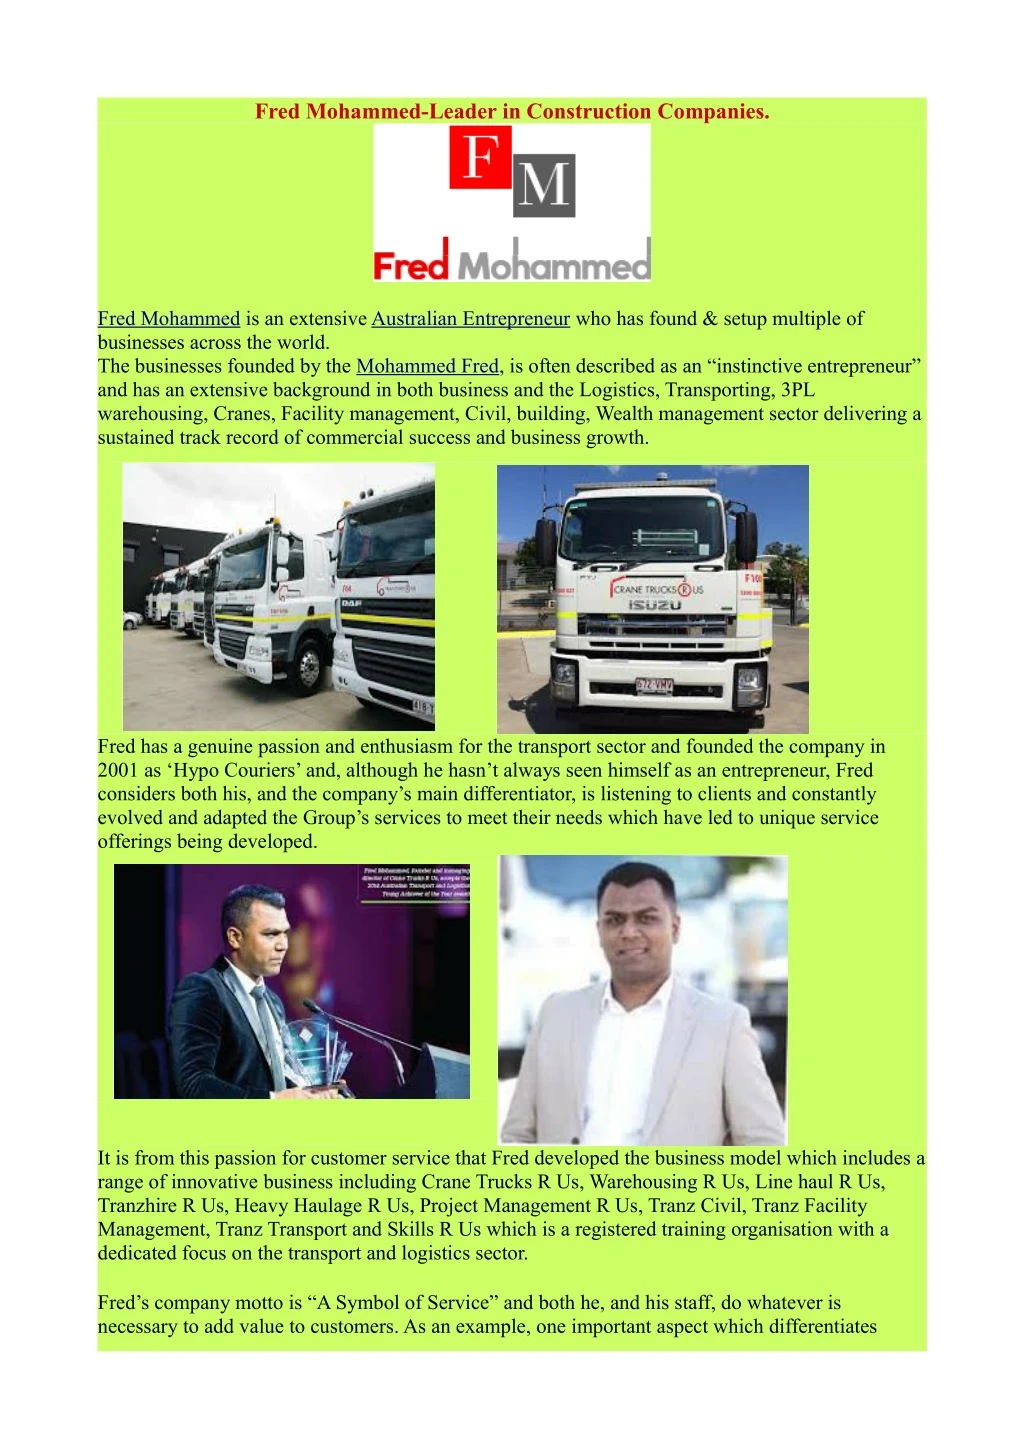 fred mohammed leader in construction companies